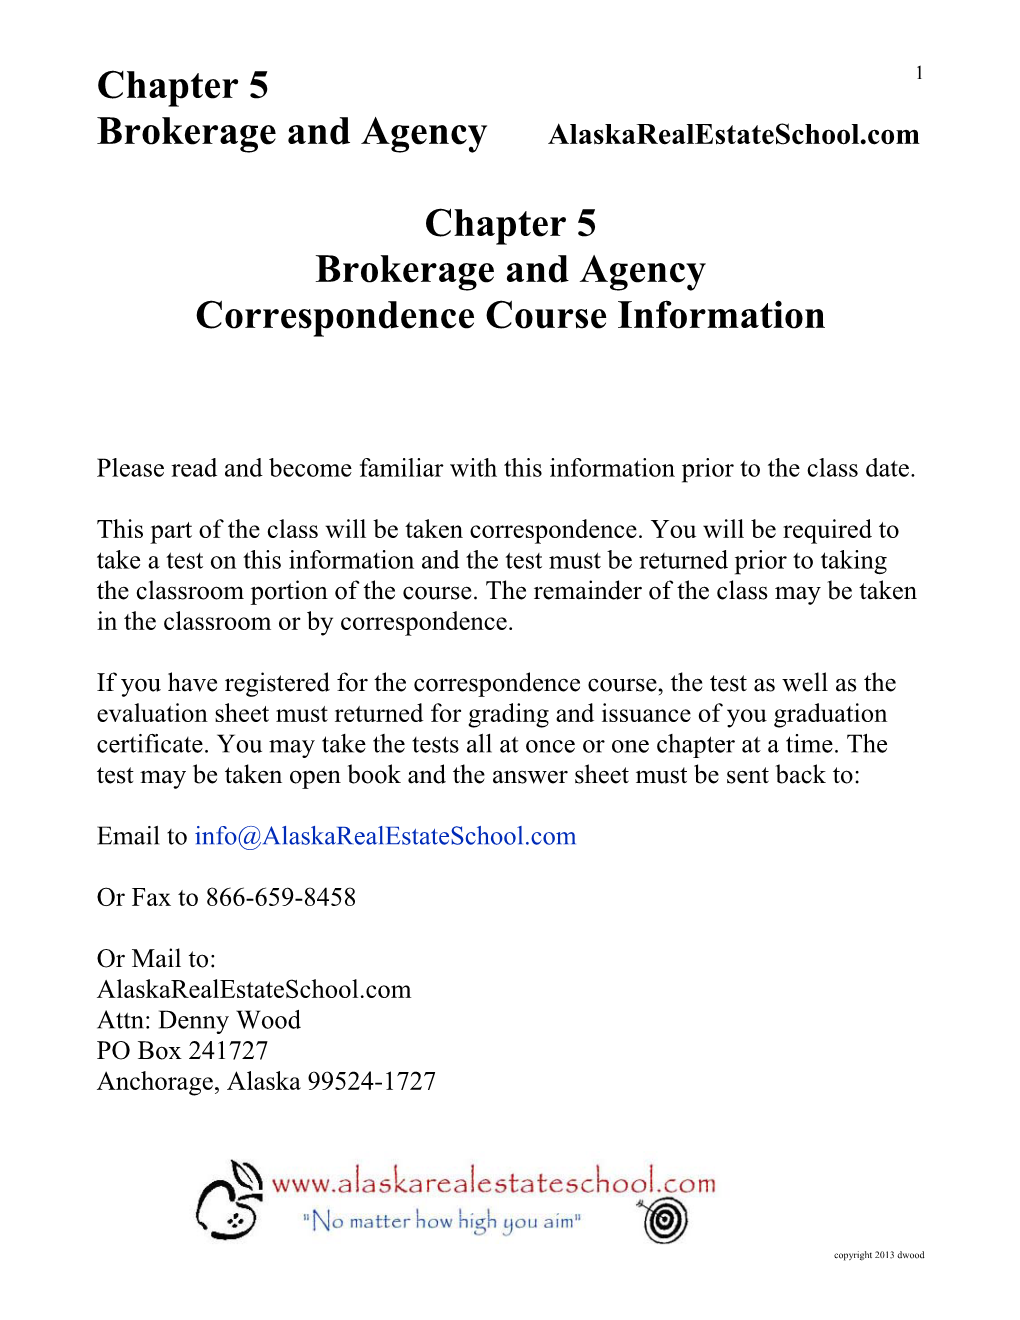 Chapter 5 Chapter 5 Brokerage and Agency Correspondence Course